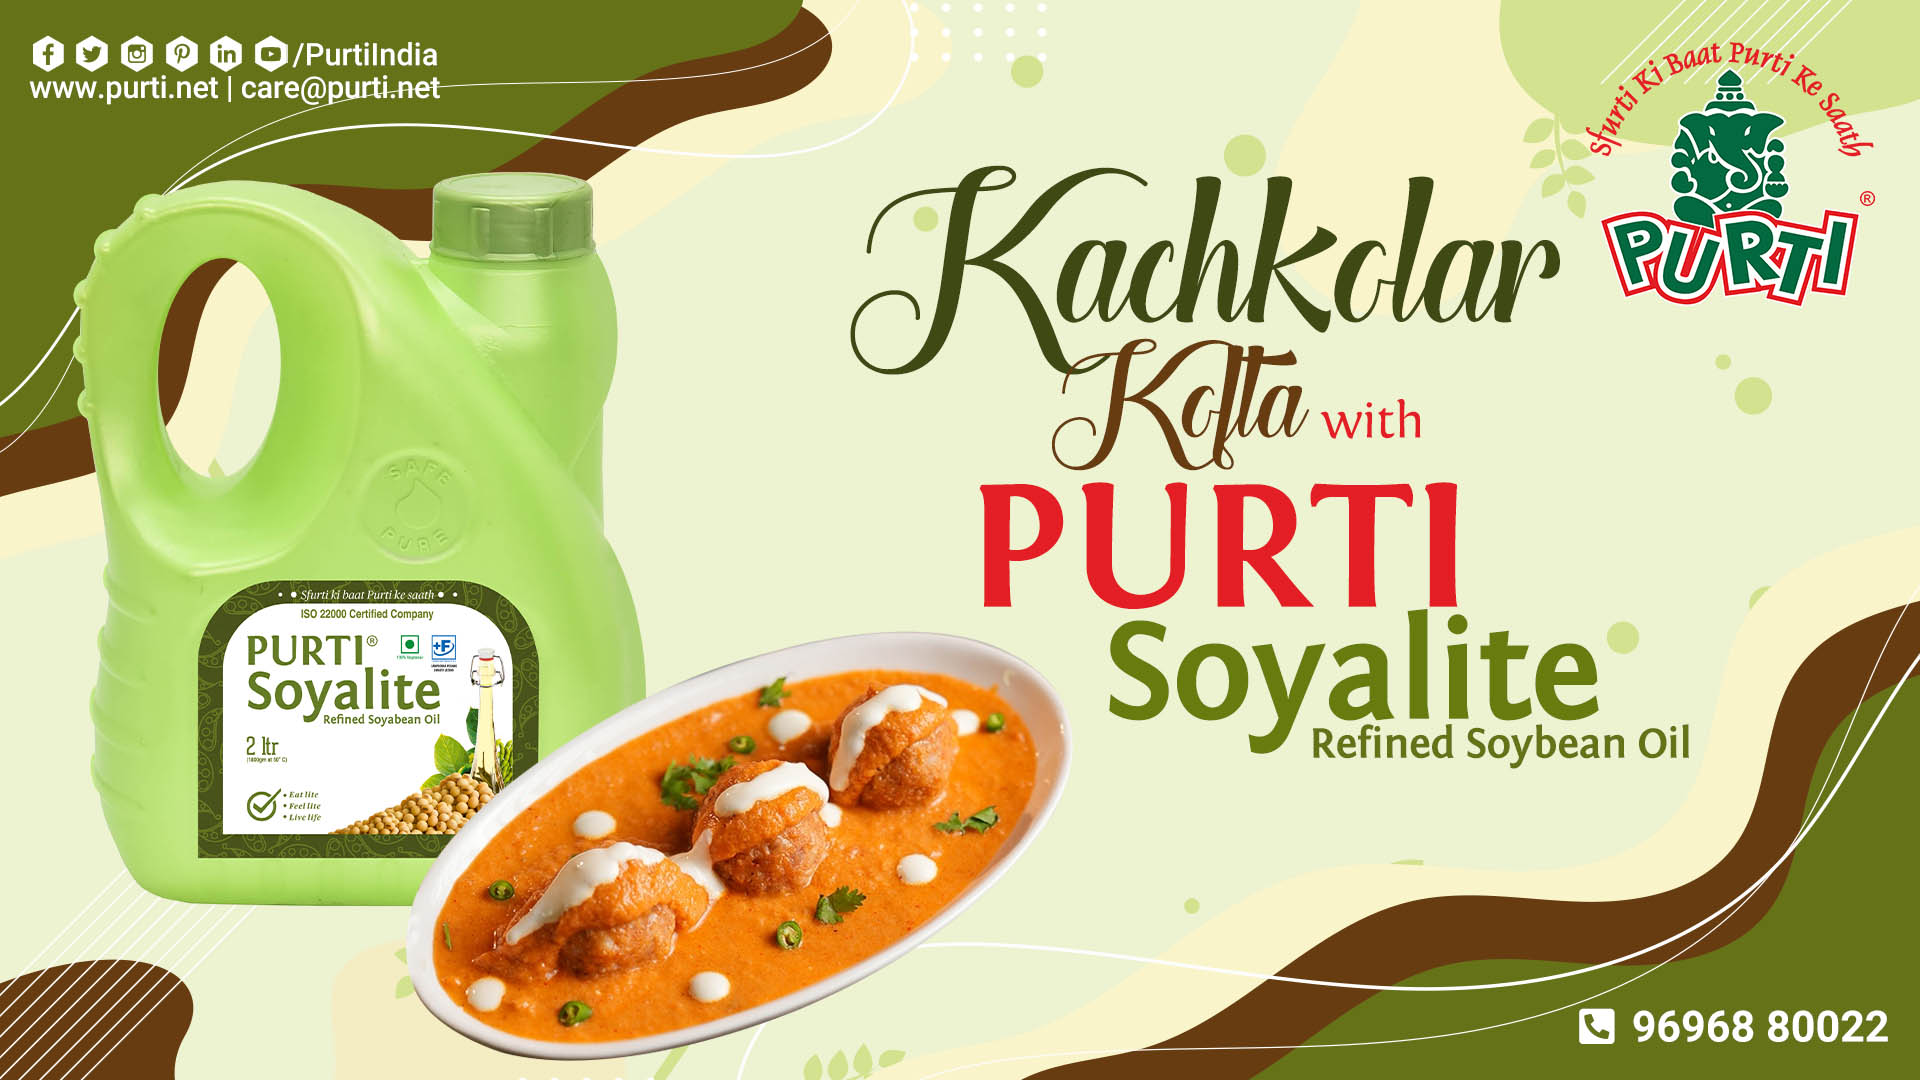 Enjoy the rich and flavorful Kachkolar Kofta, made with love and the goodness of Purti Soyalite Refined Soybean Oil!